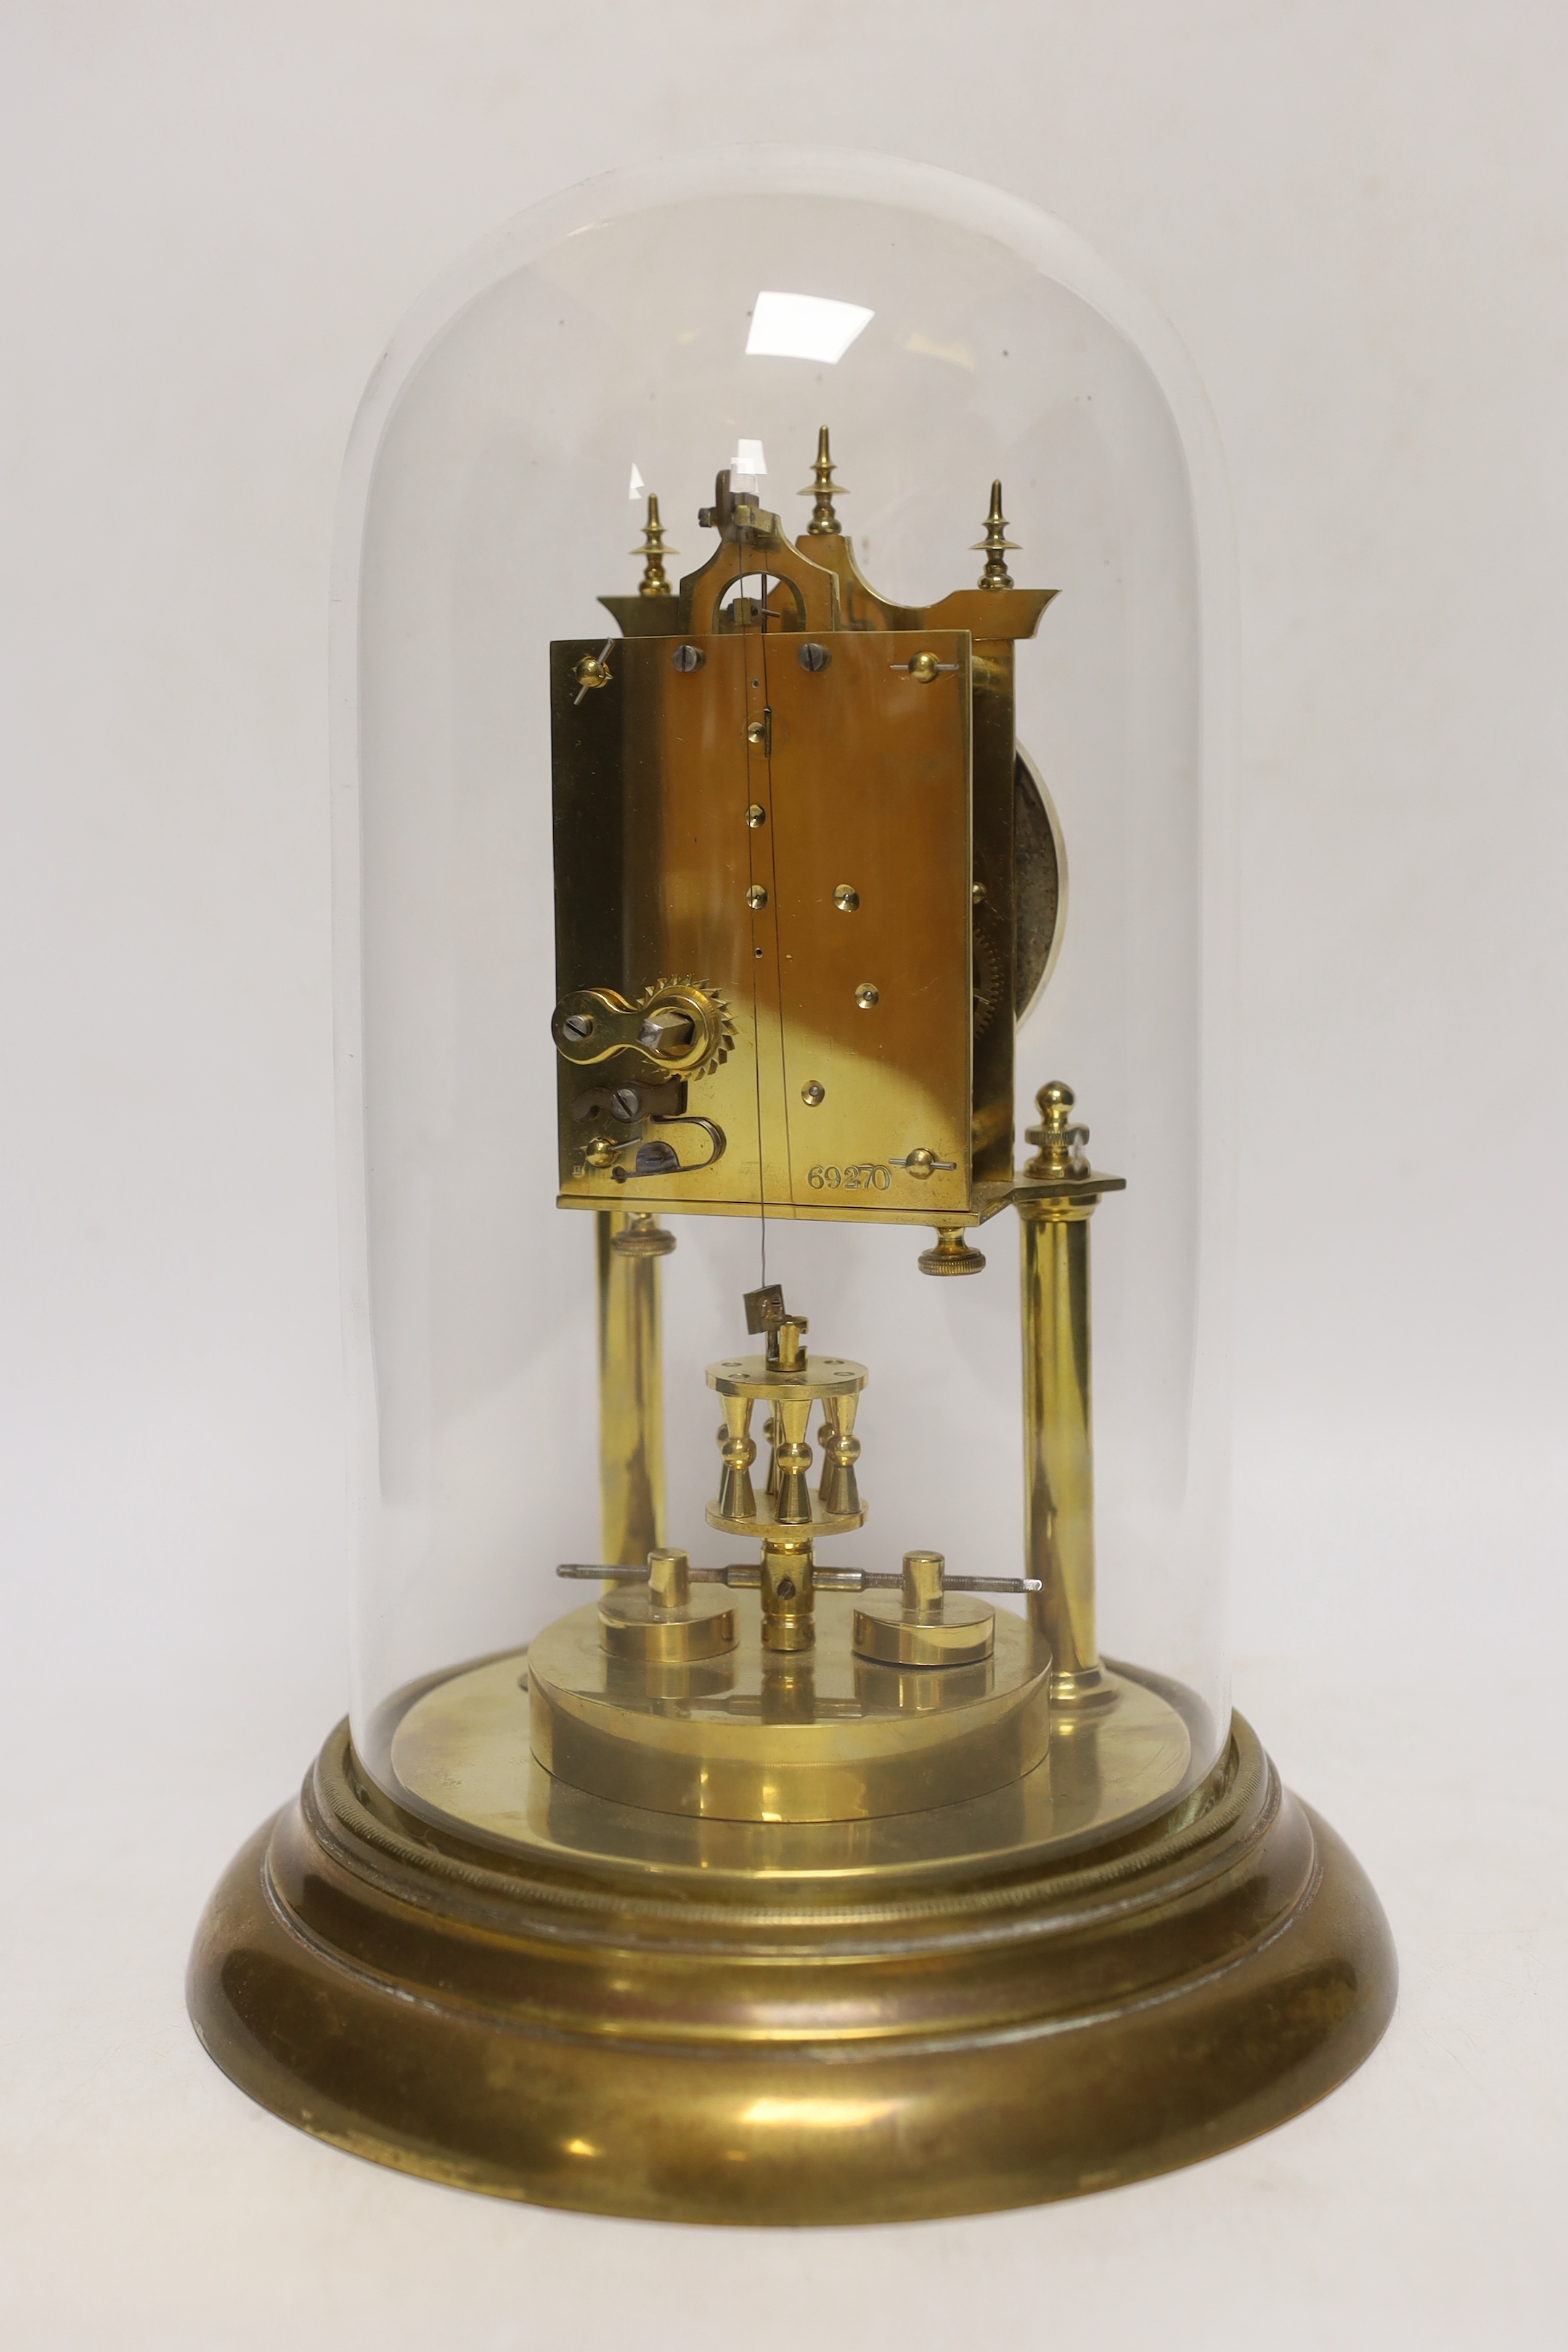 An early 20th century clock under a glass dome, 27cm high - Image 3 of 3